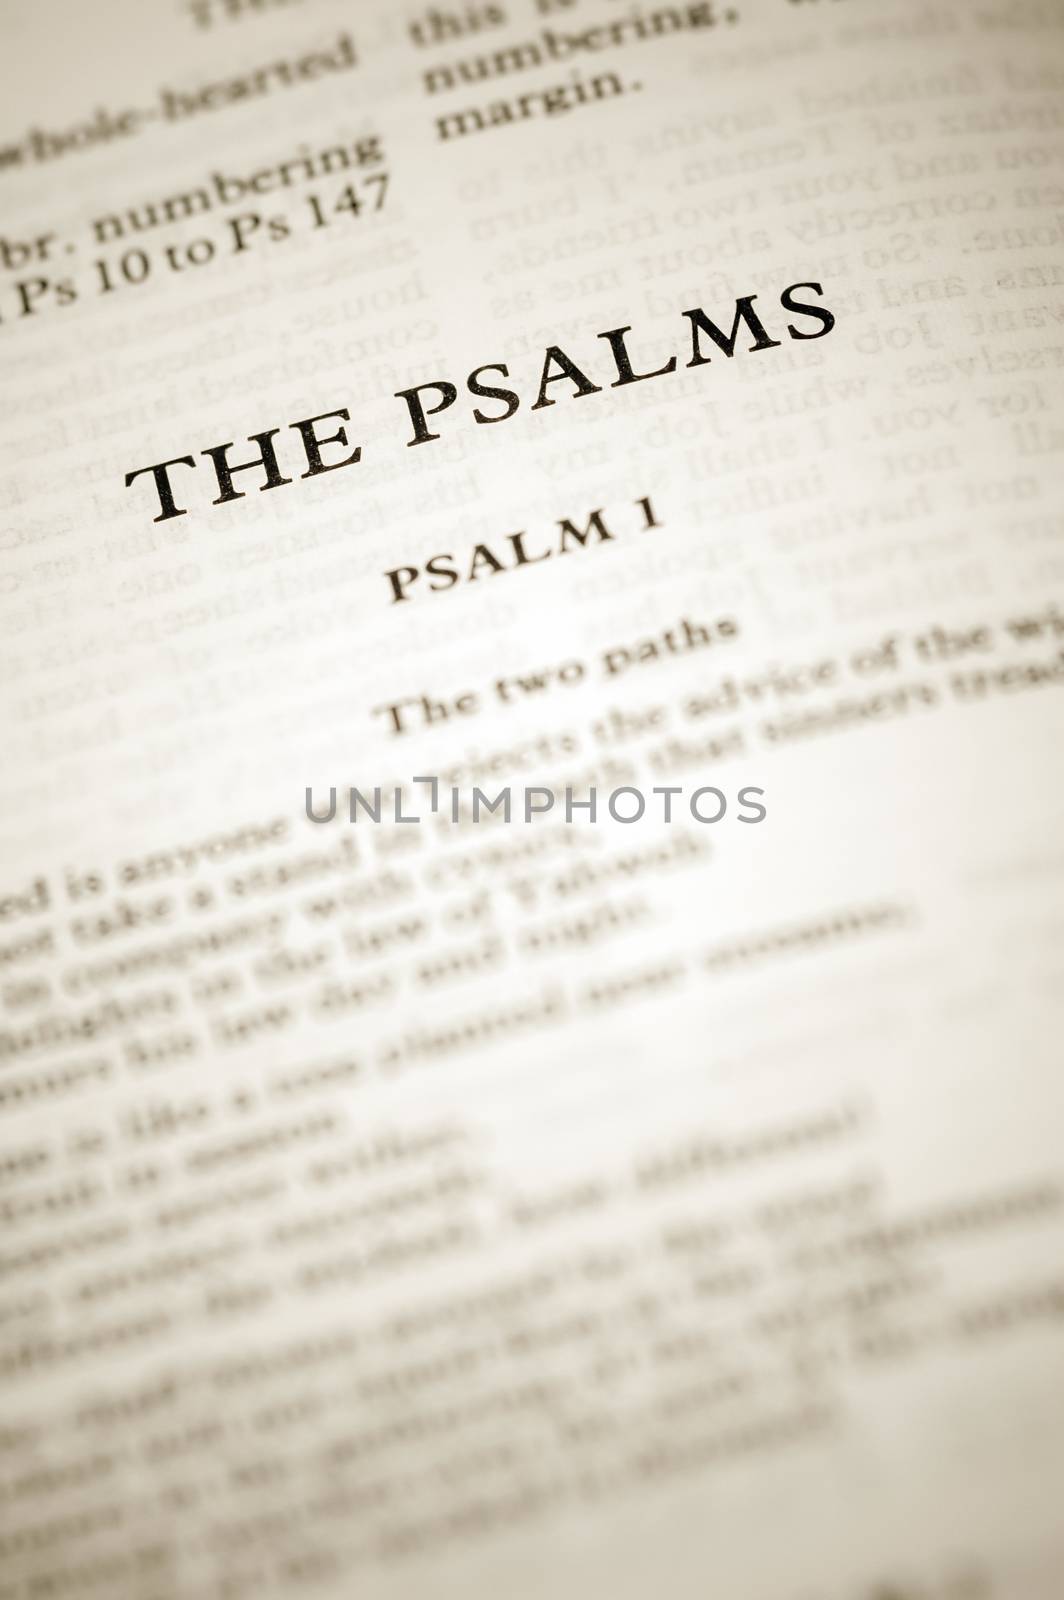 the psalms biblical scripture starting with the first chapter